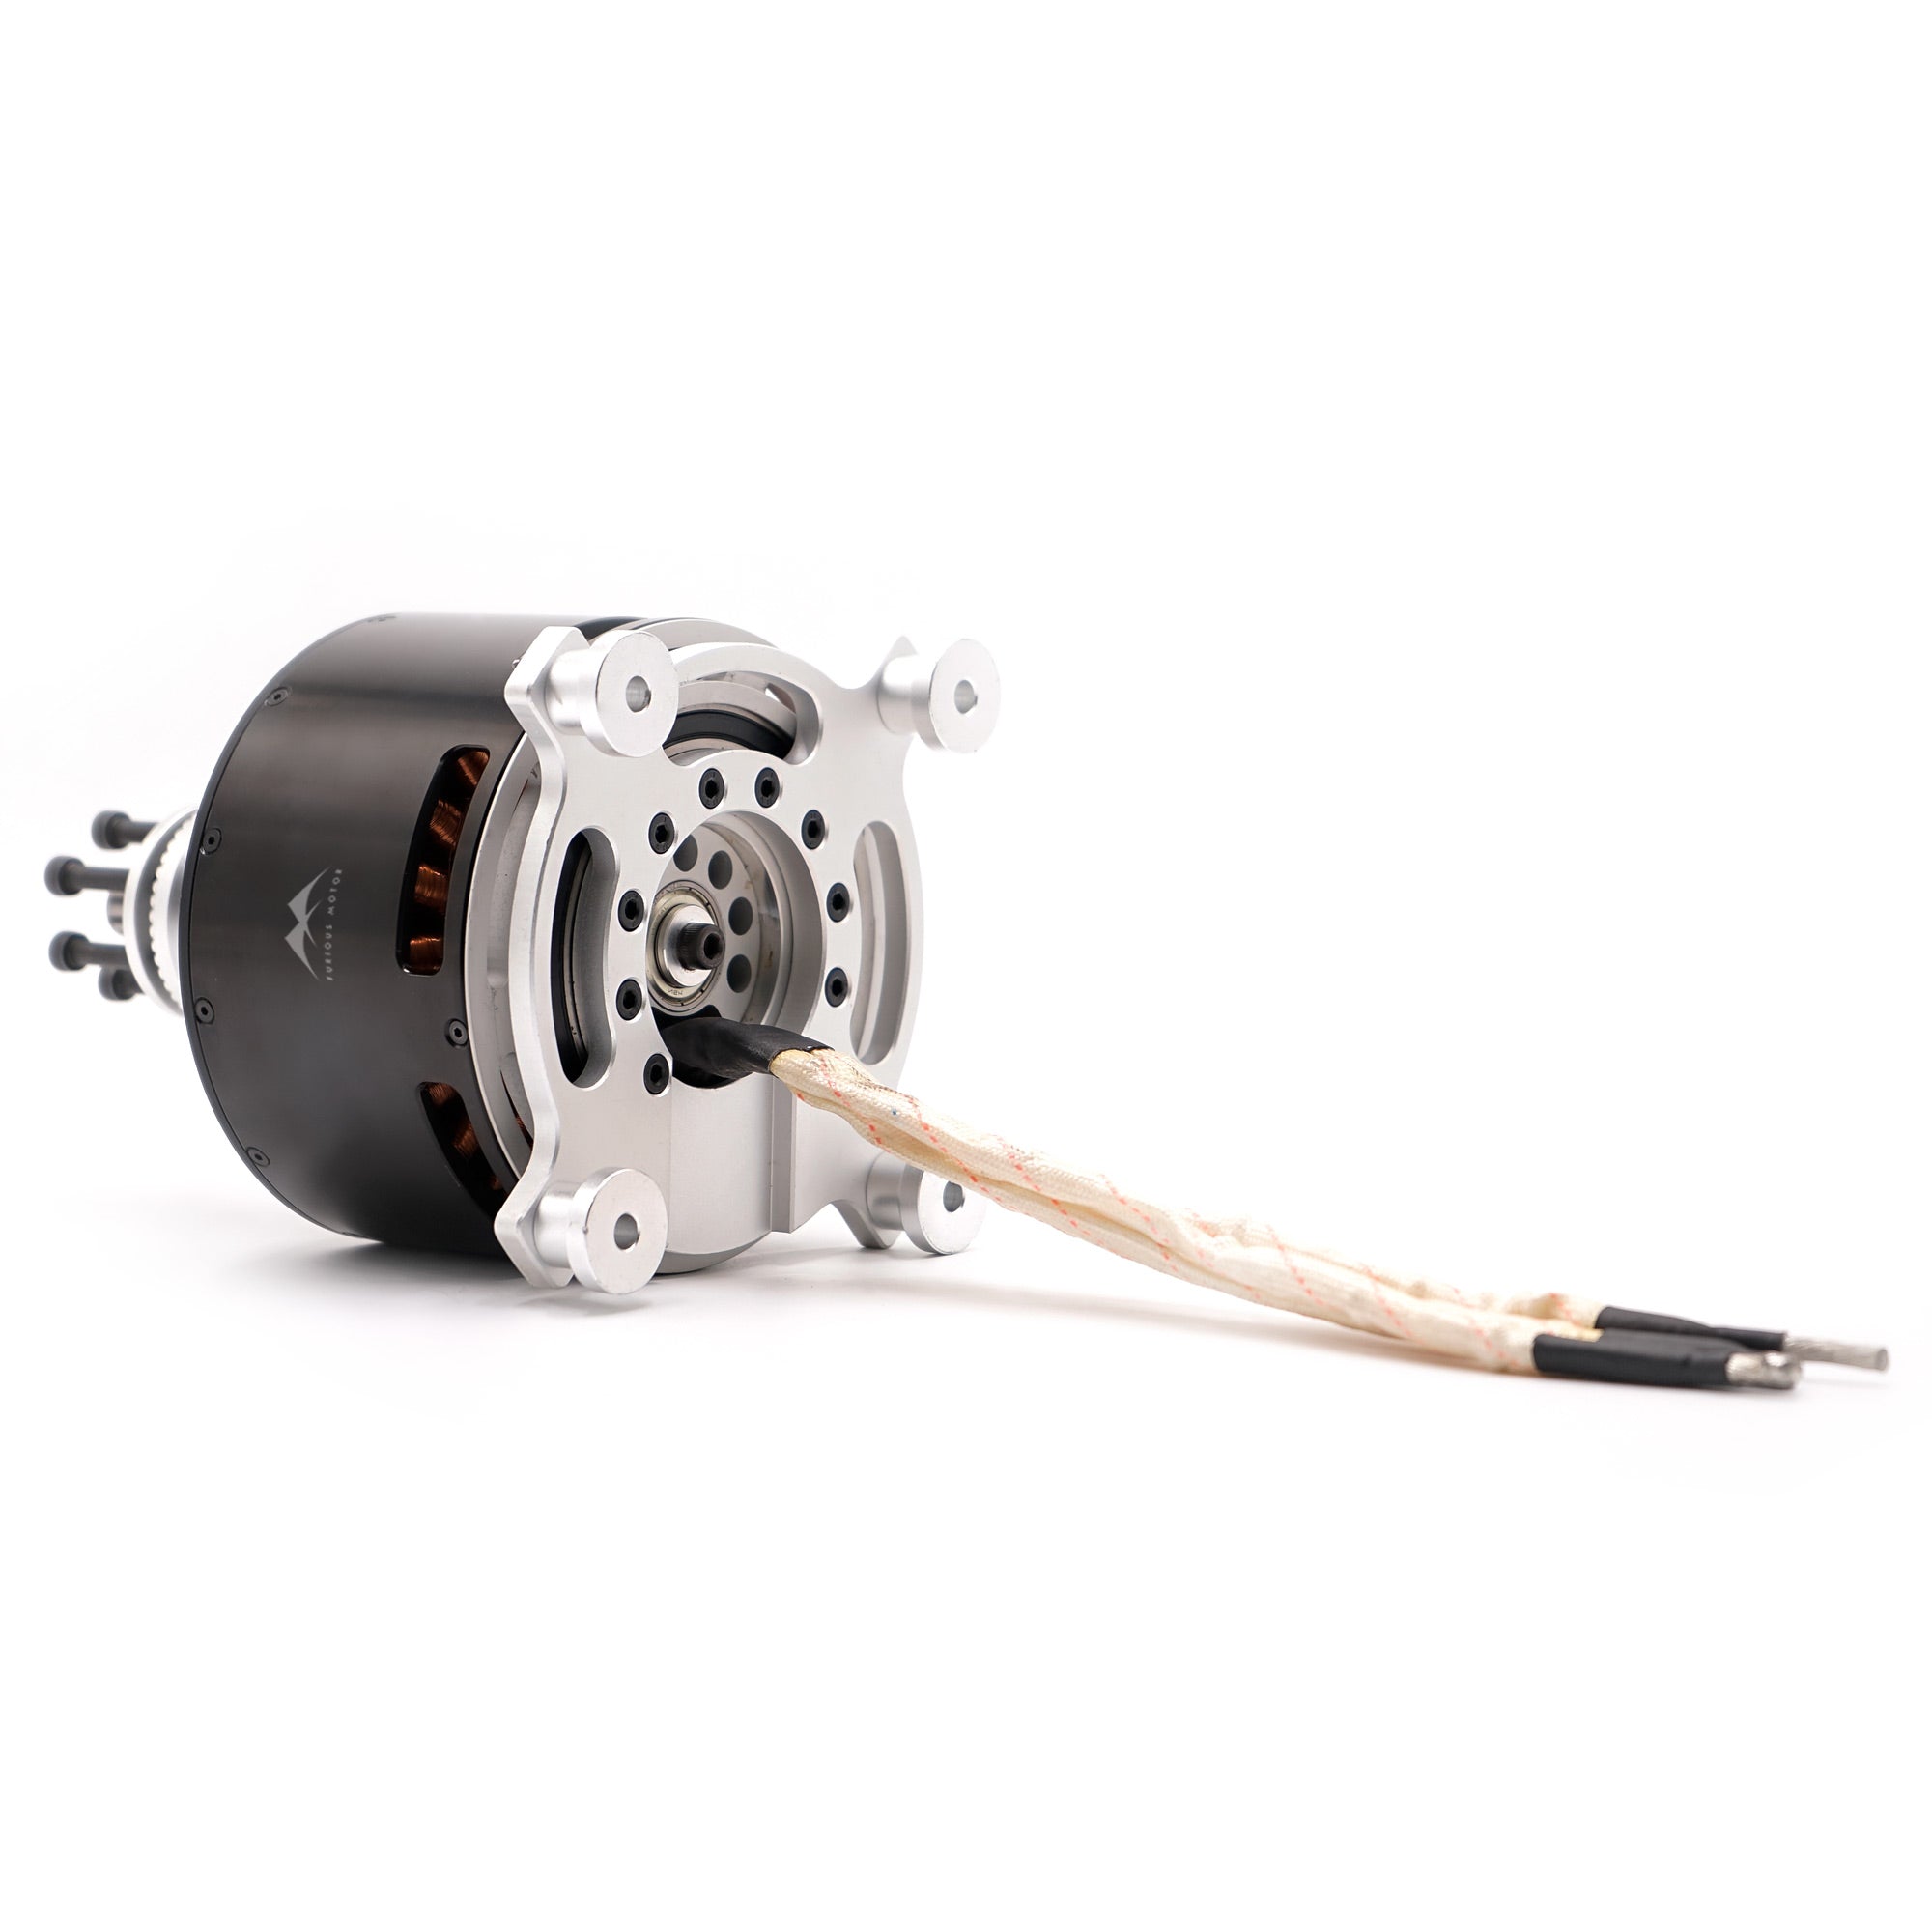 12090 Drone Motor Brushless Electric Motor Permanent Magnet Brushless Motor for Paramotor and Paraglider